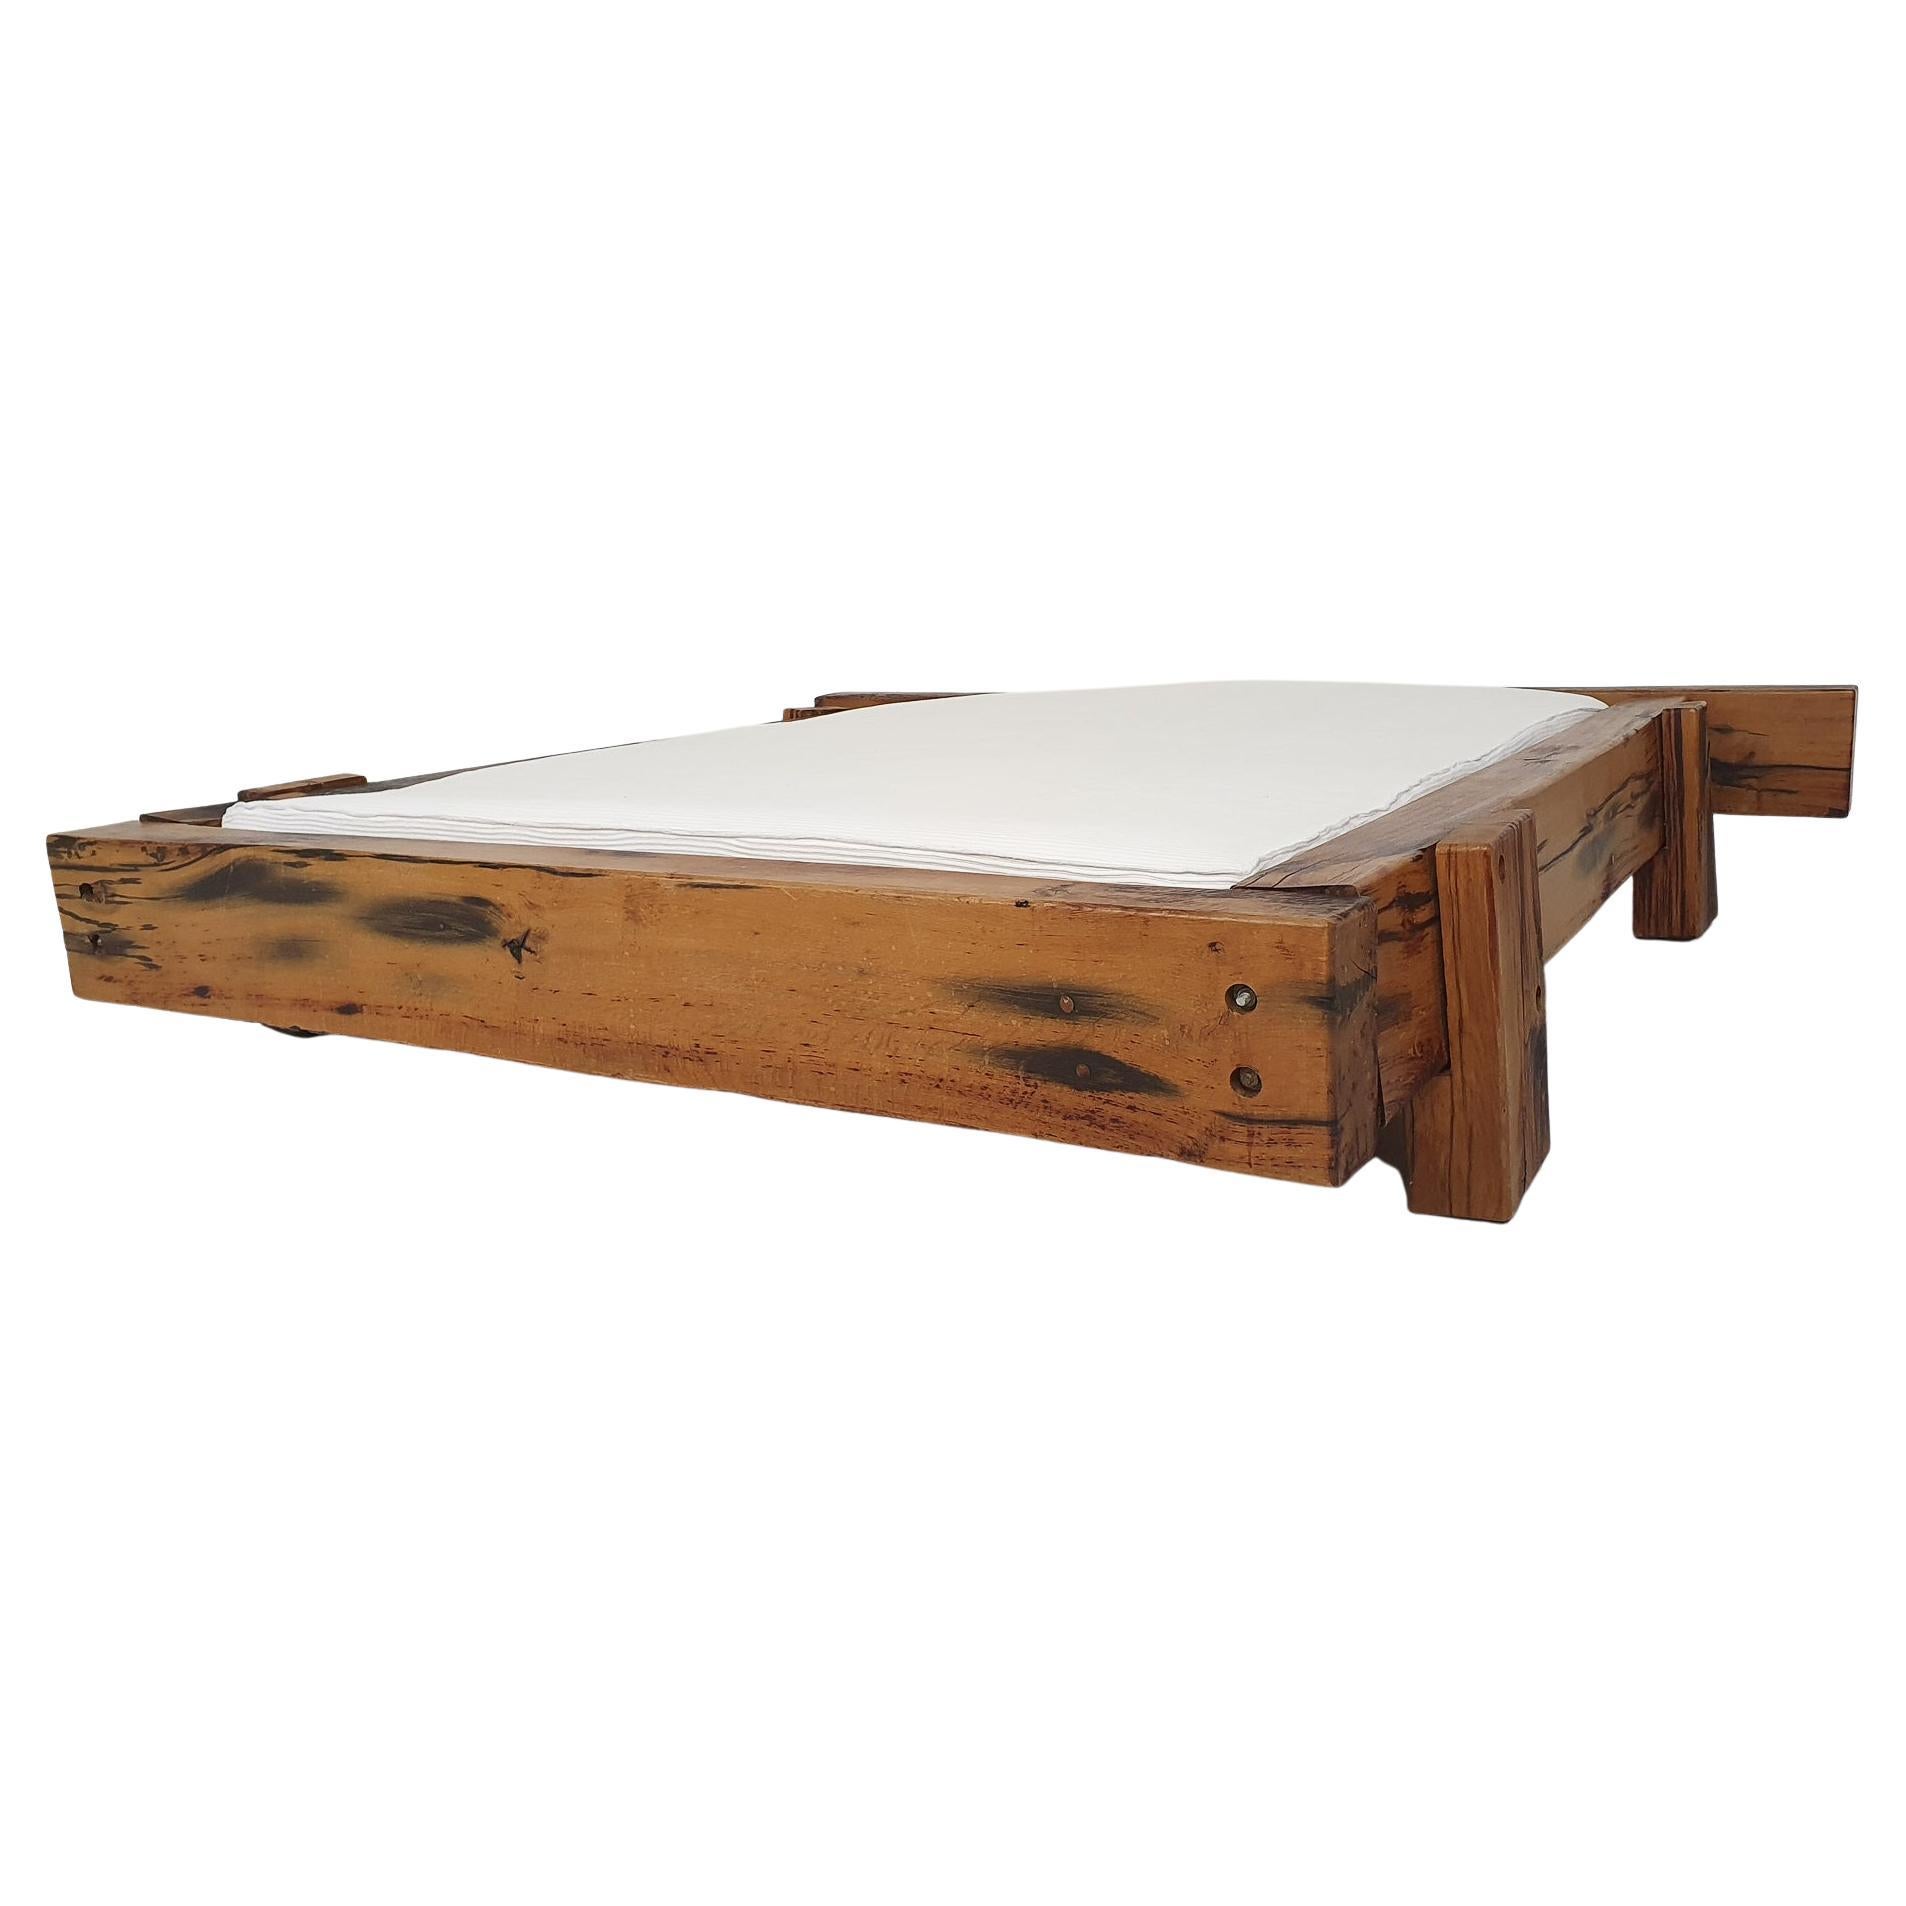 Very nice bed made of heavy solid wooden bars which are attached with bolts.
The wood has a nice patina, at some points the wood is cracked, but this does not affect the structure, it only makes it more beautuful, like it comes straight out of